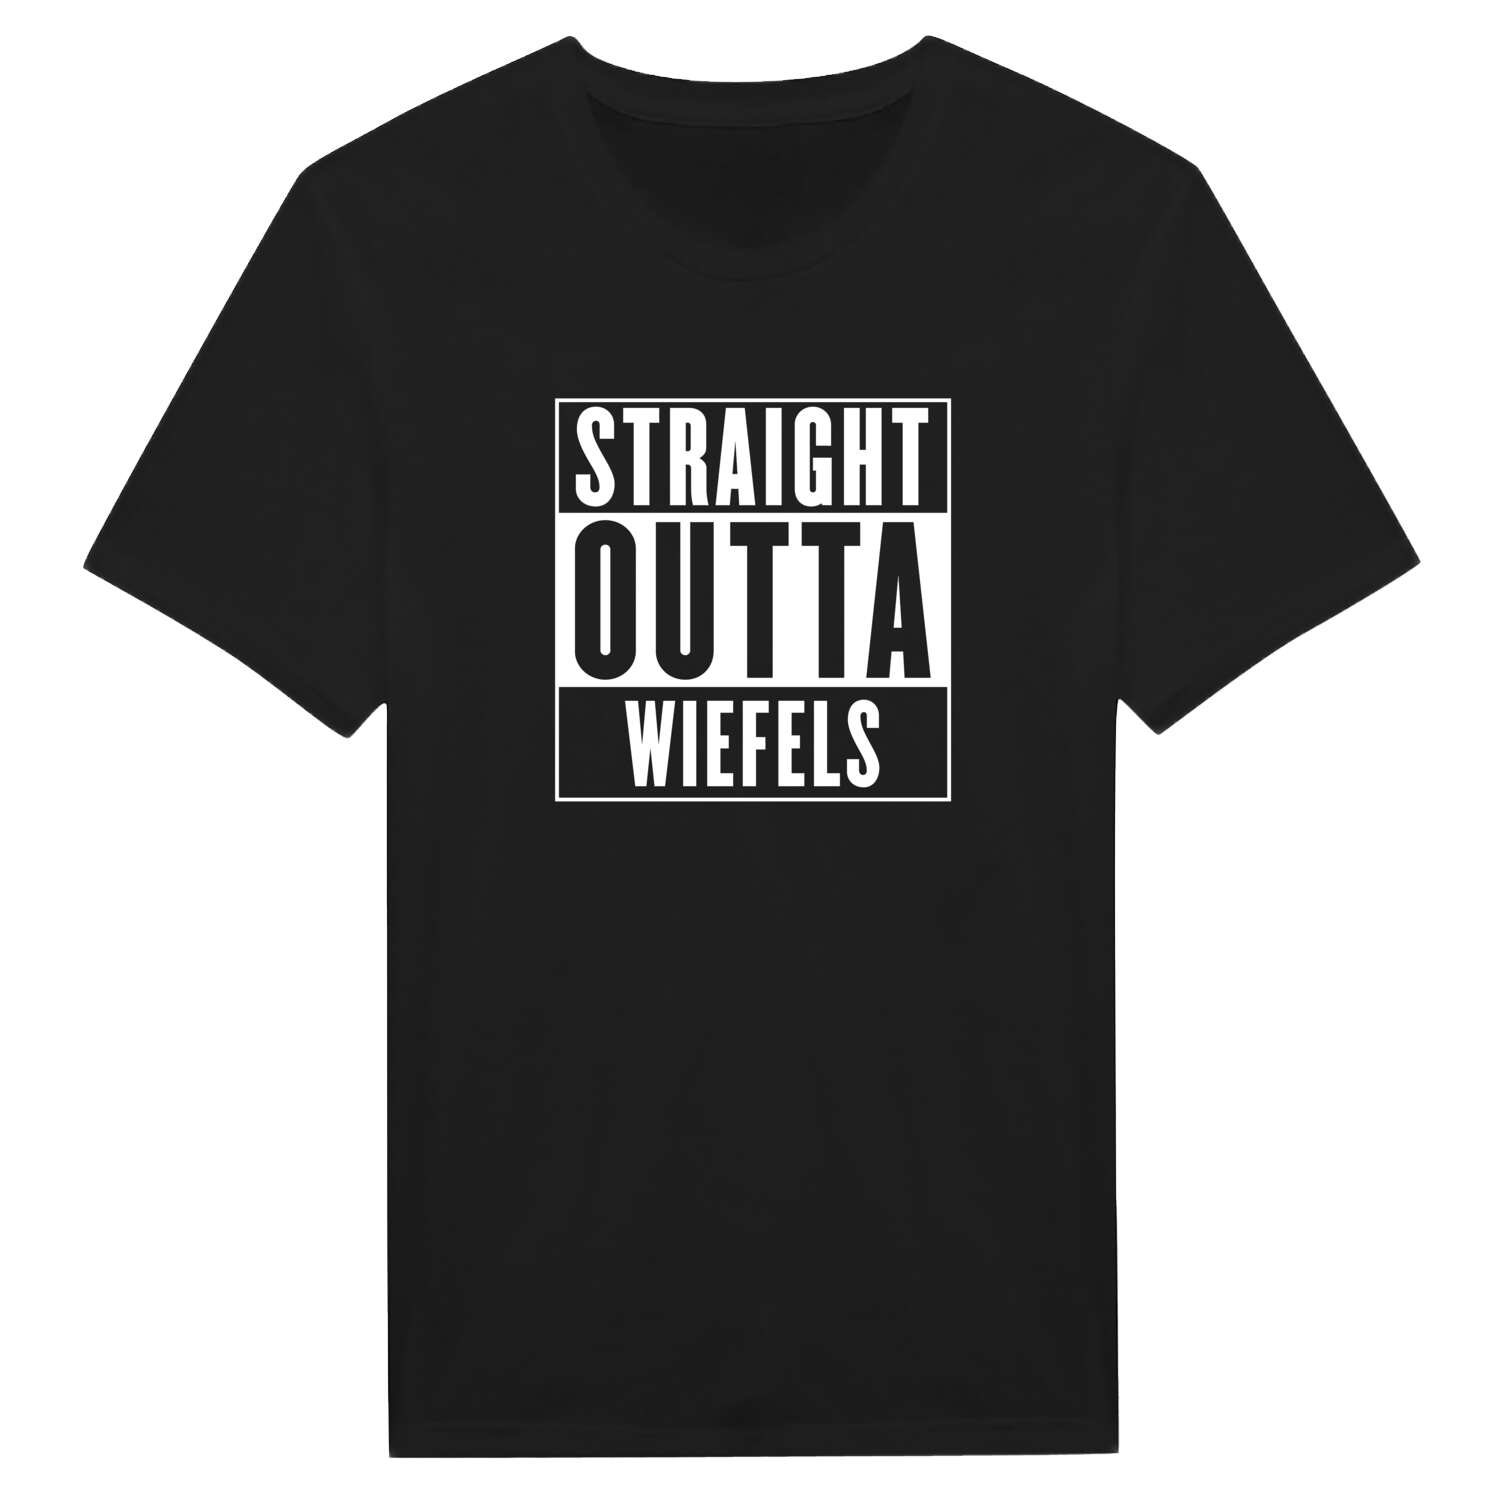 Wiefels T-Shirt »Straight Outta«